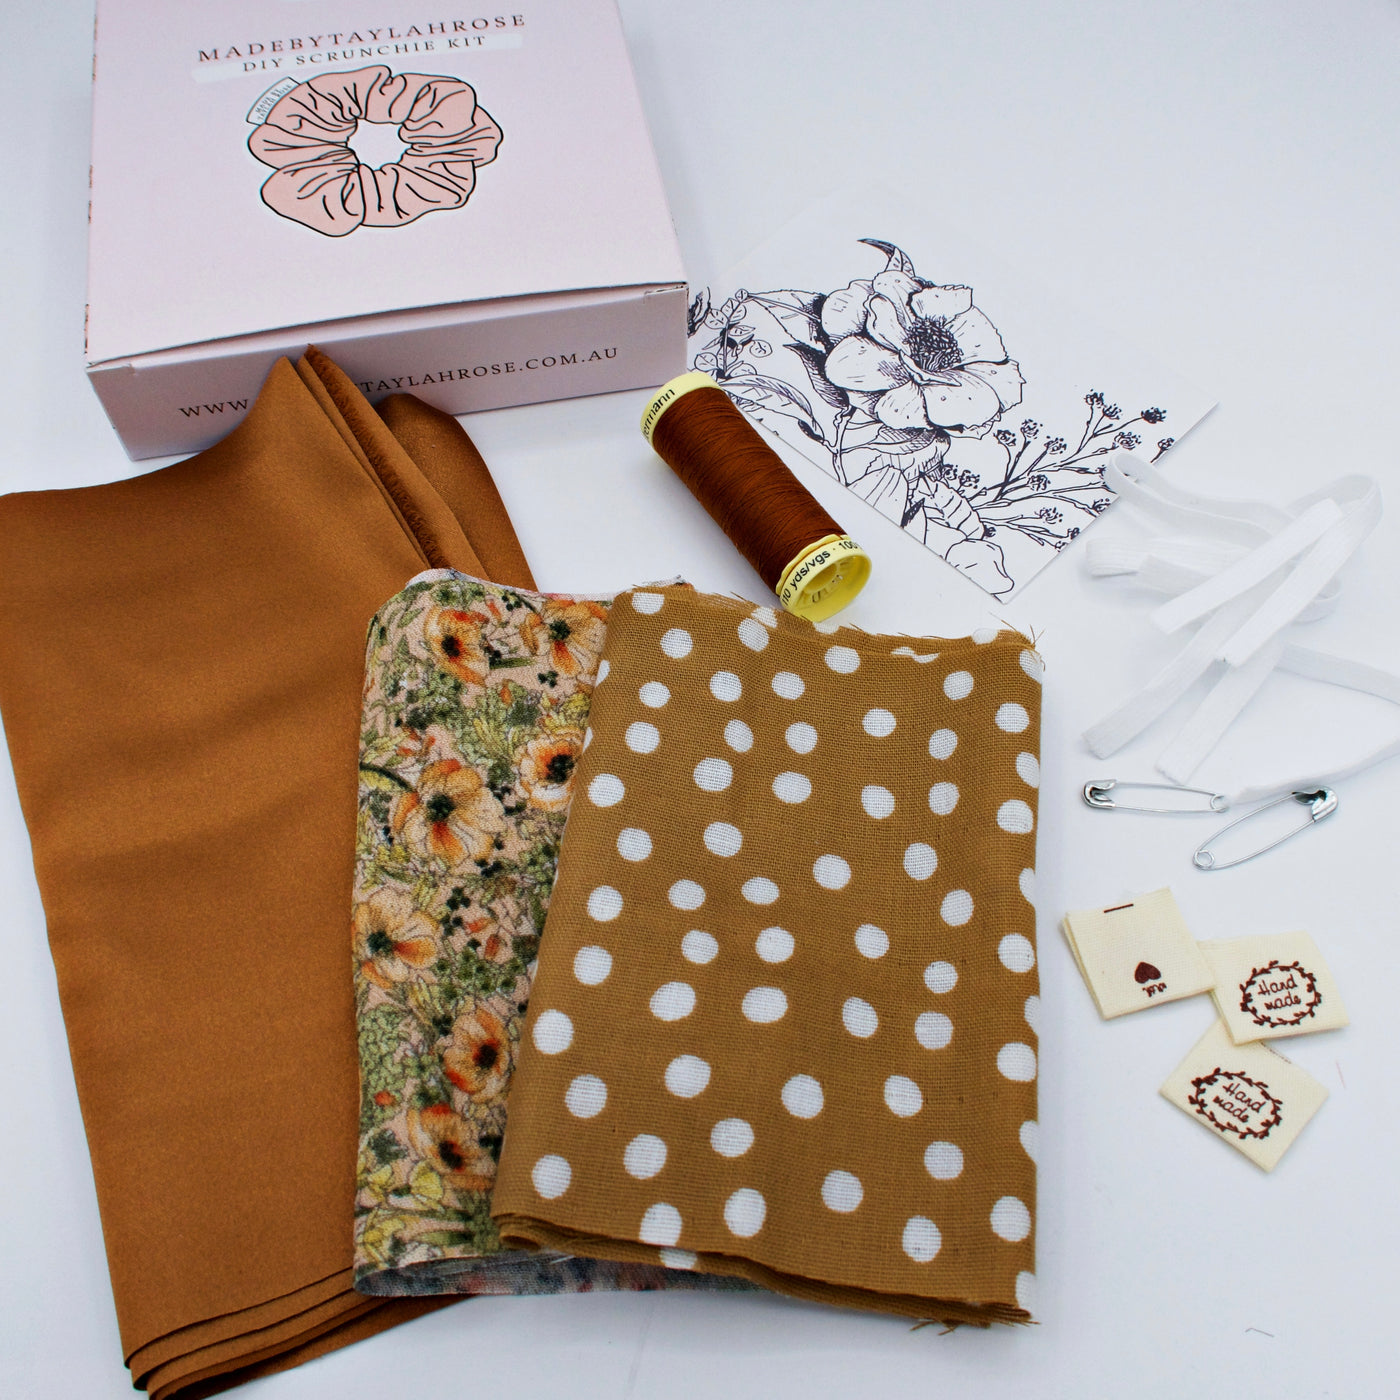 Deluxe DIY Scrunchie kits - makes 3 - sewing machine edition